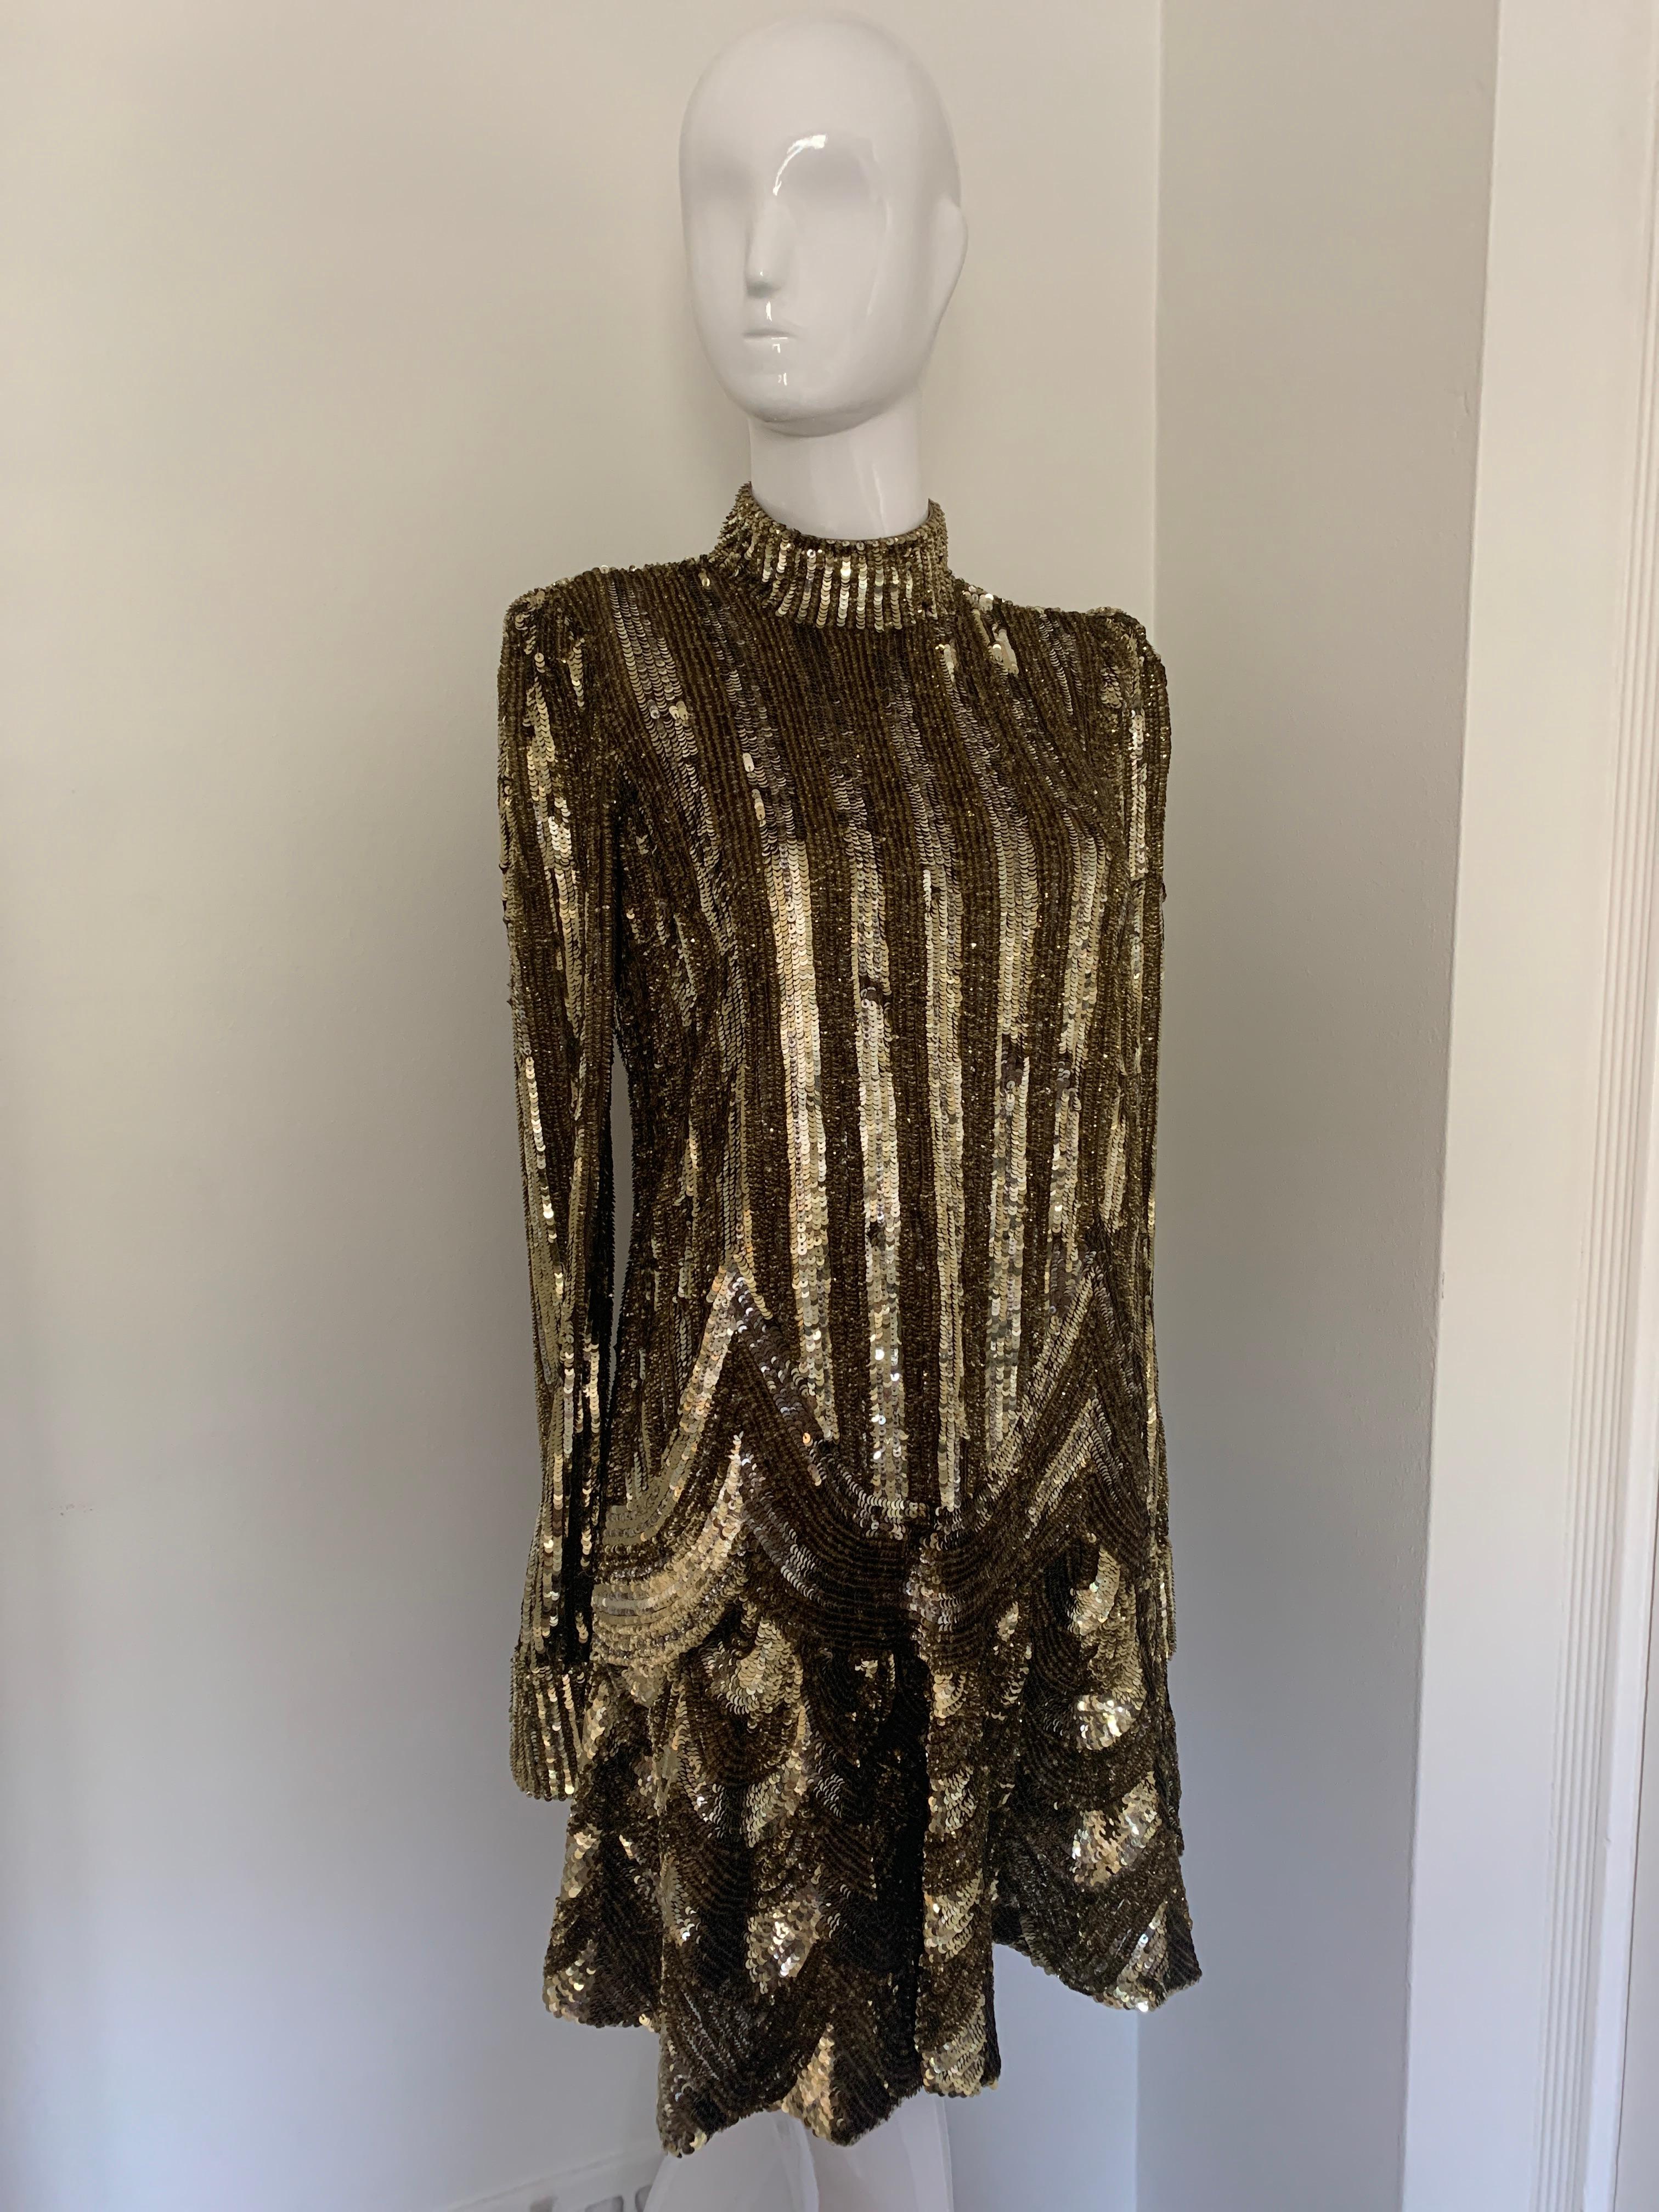 MARC JACOBS SEQUINED MOCK-NECK MINI DRESS
Gold Sequins
Long Sleeve 
Straight Cut with ruffle at the bottom 
Two Shades of gold 
Made in the USA 
Size US 2 

Excellent Condition 
